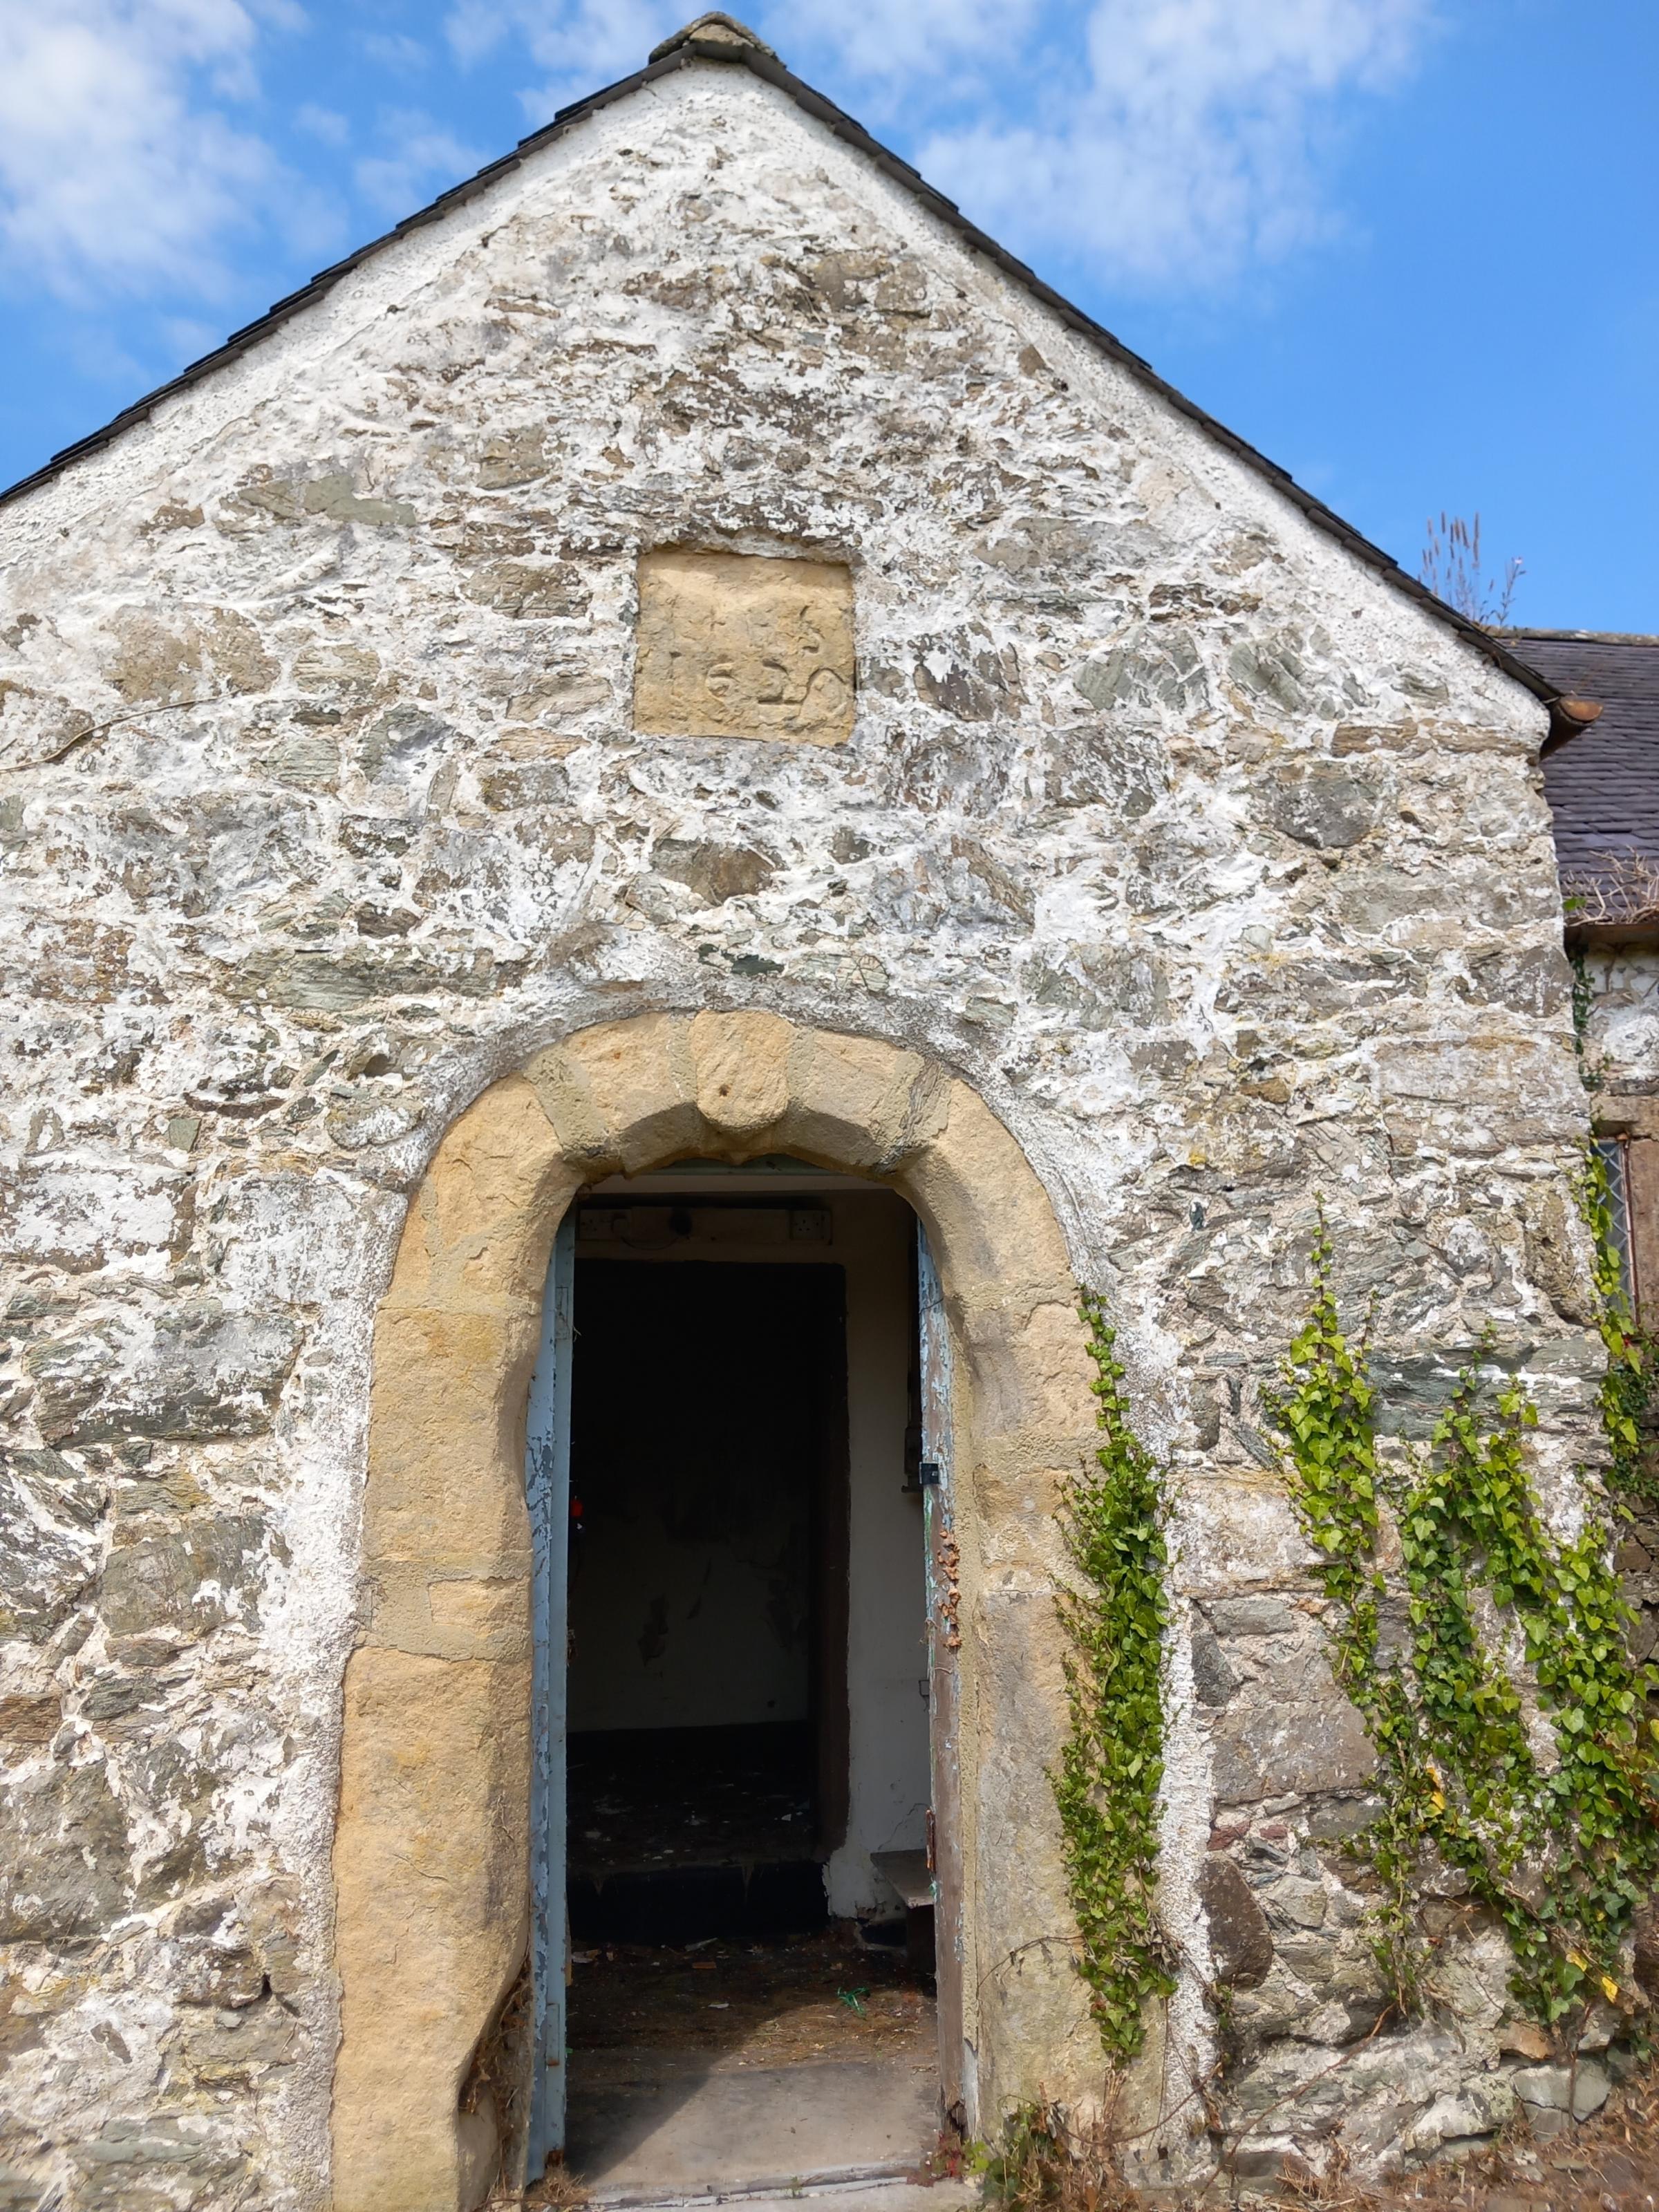 Doorway with date stone of 1620 at Penmynydd Almshouses (Image Dale Spridgeon)